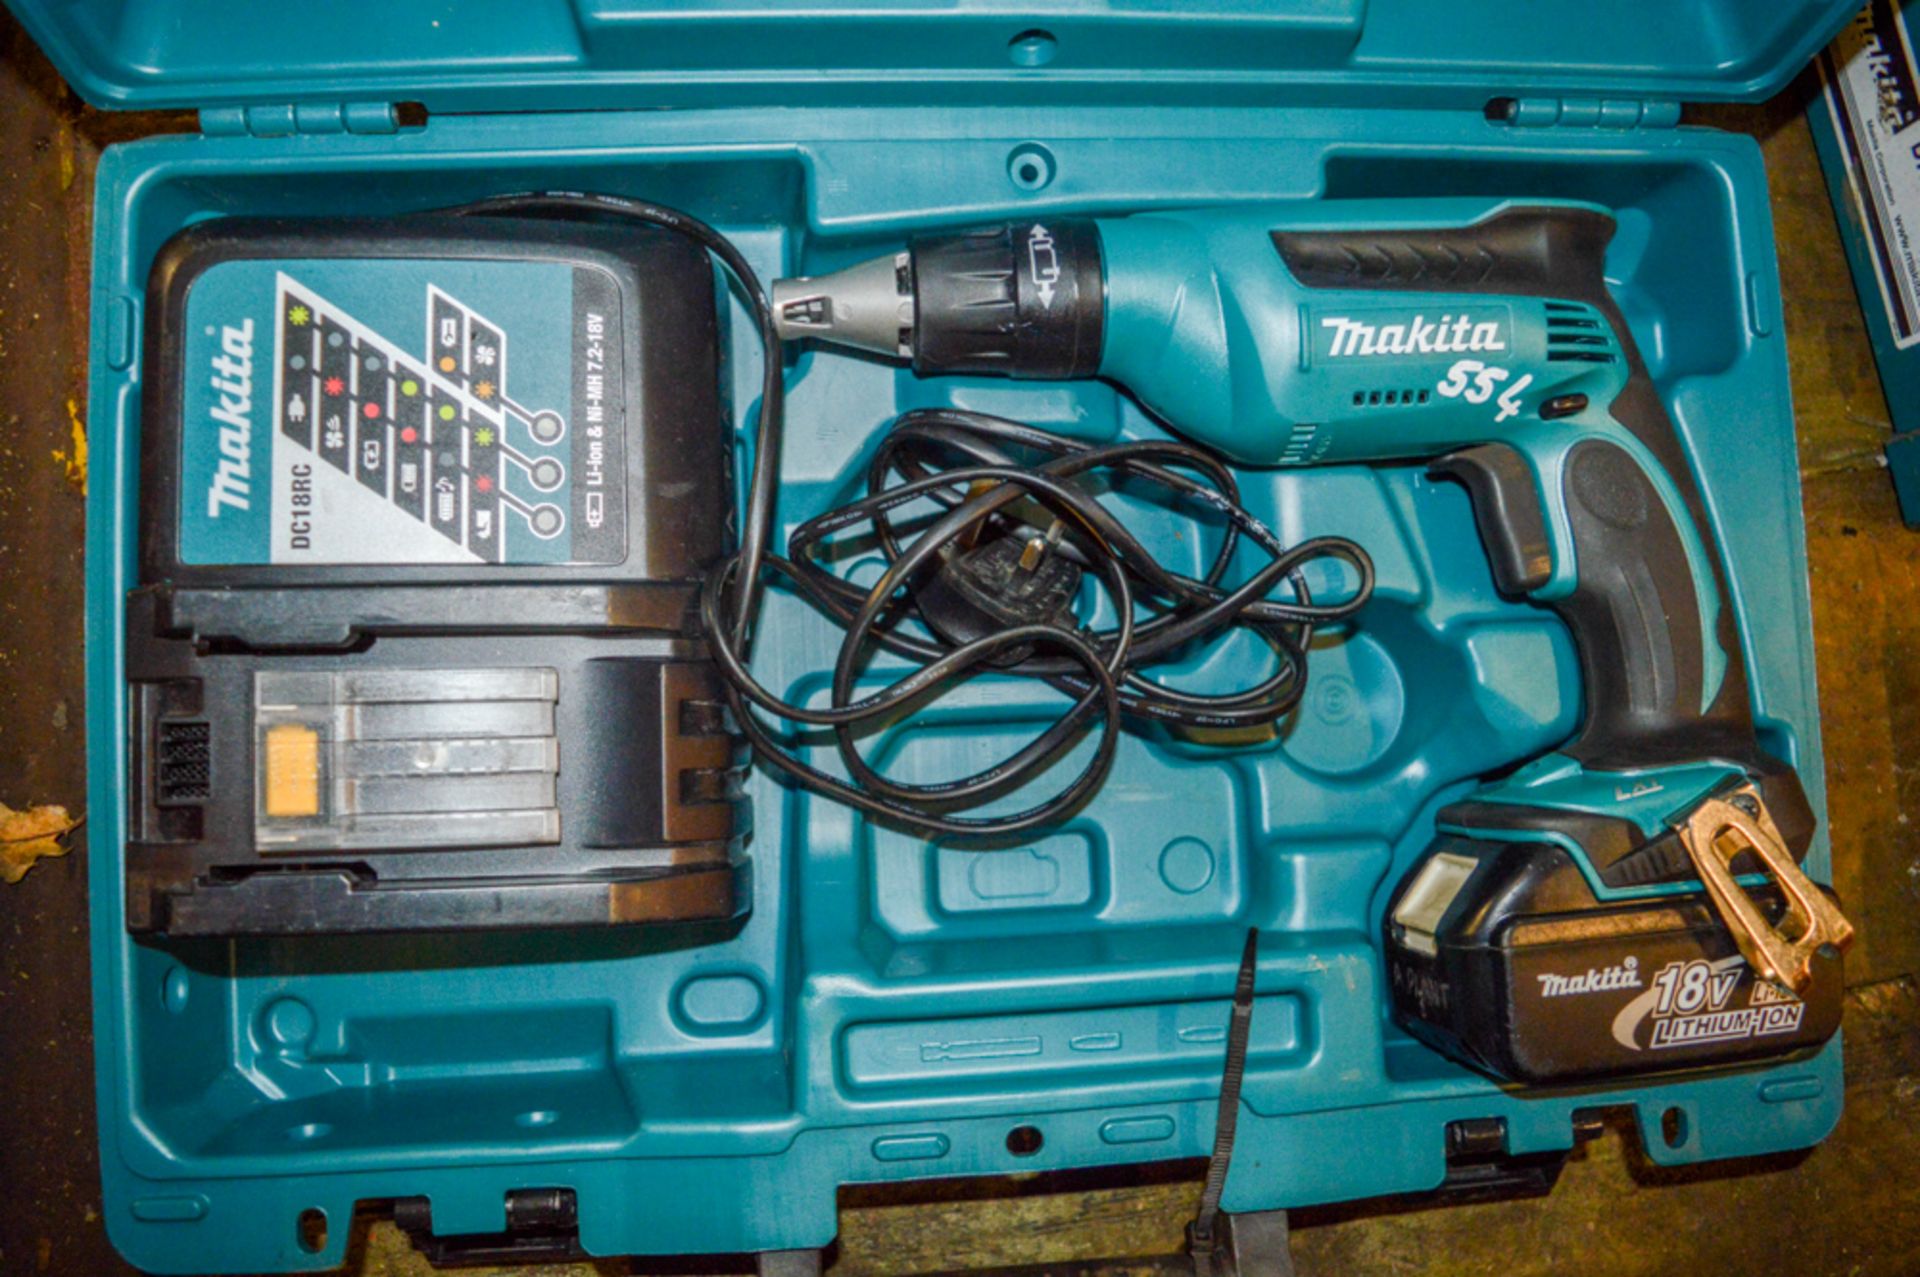 Makita 18v cordless screwgun c/w battery, charger & carry case A648647